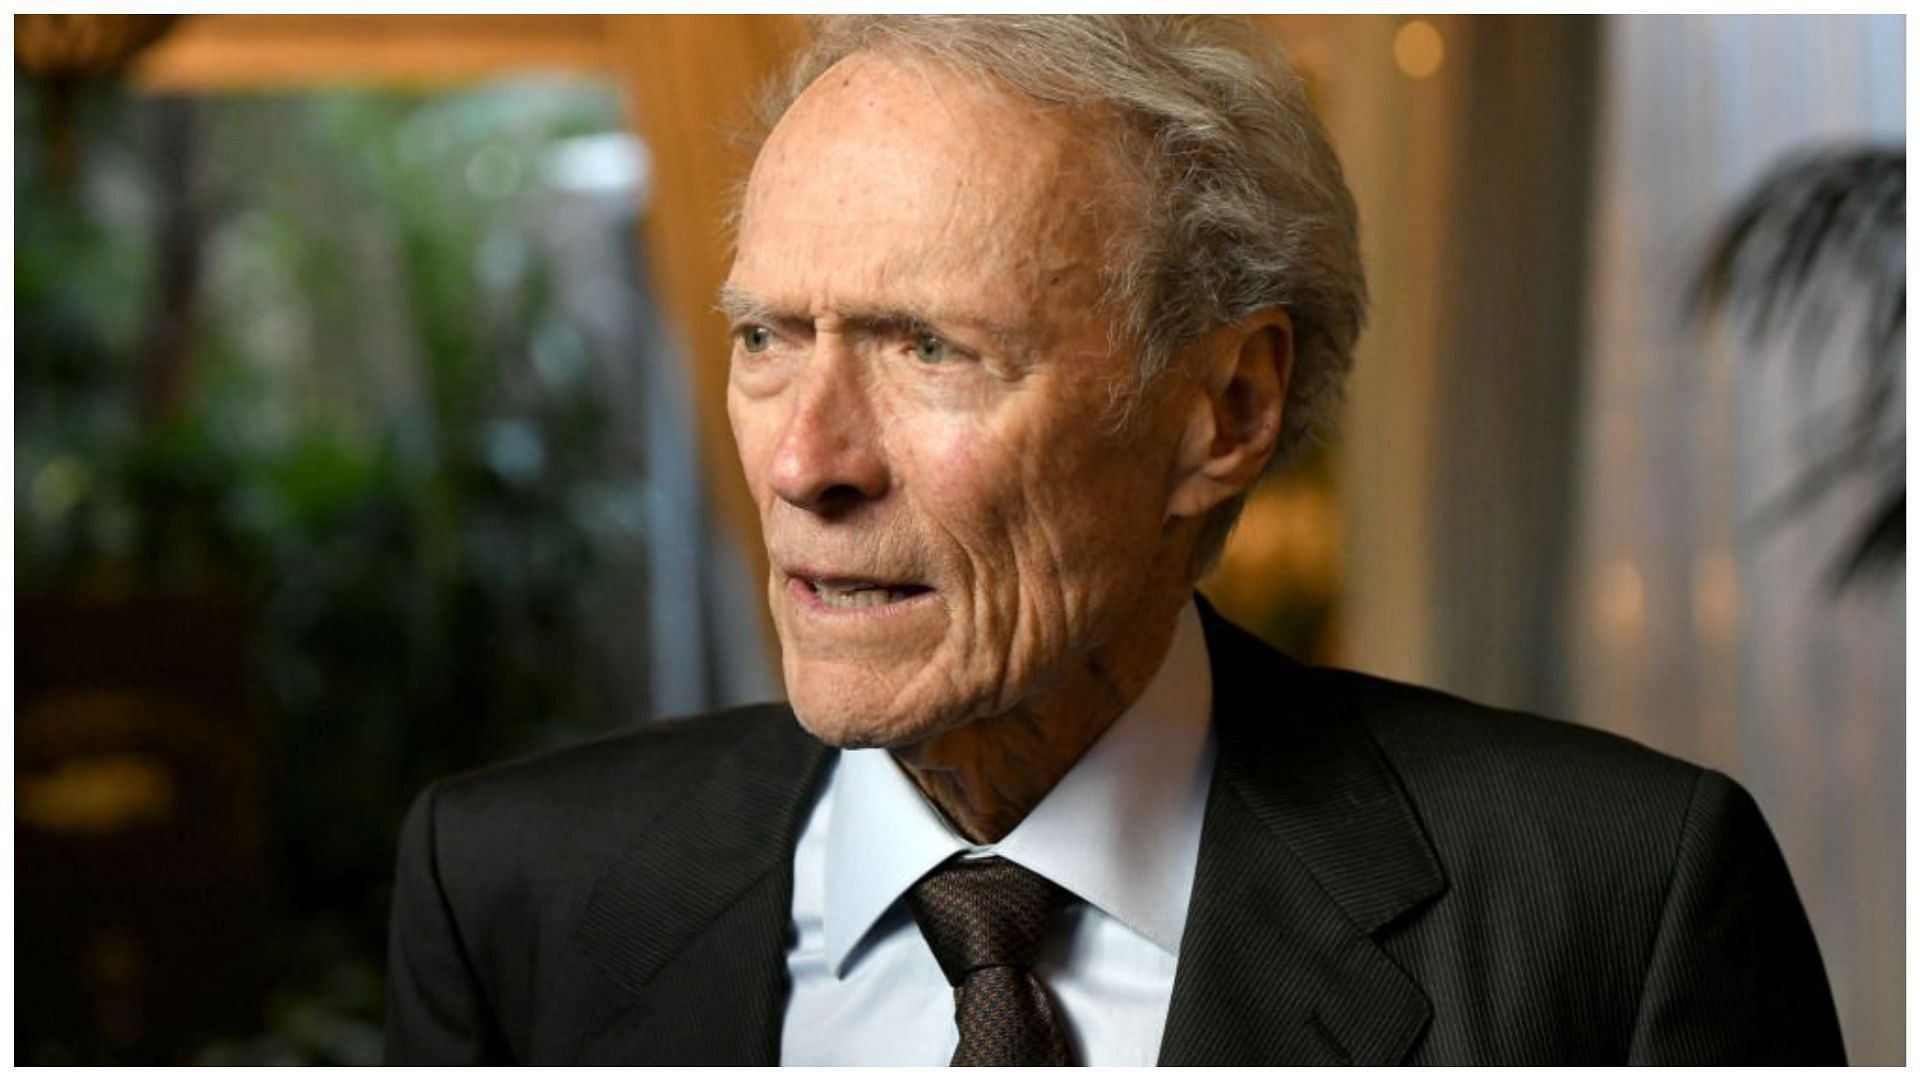 Clint Eastwood is a well-known actor, film director and producer (Image via Michael Kovac/Getty Images)